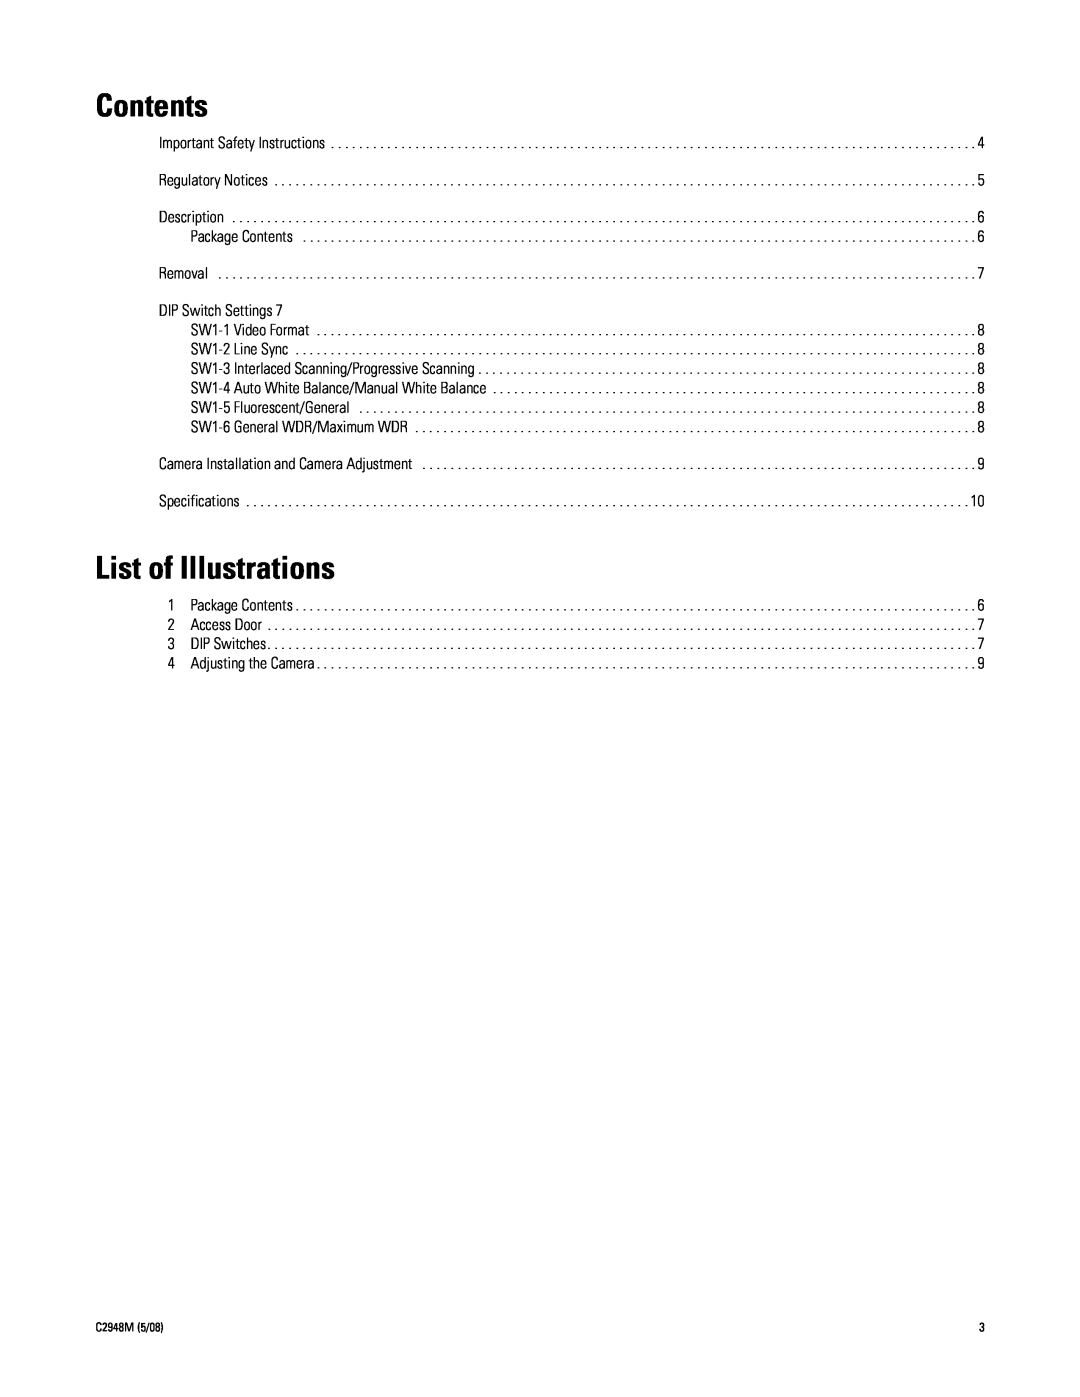 Pelco pmp-cwv9r manual Contents, List of Illustrations 